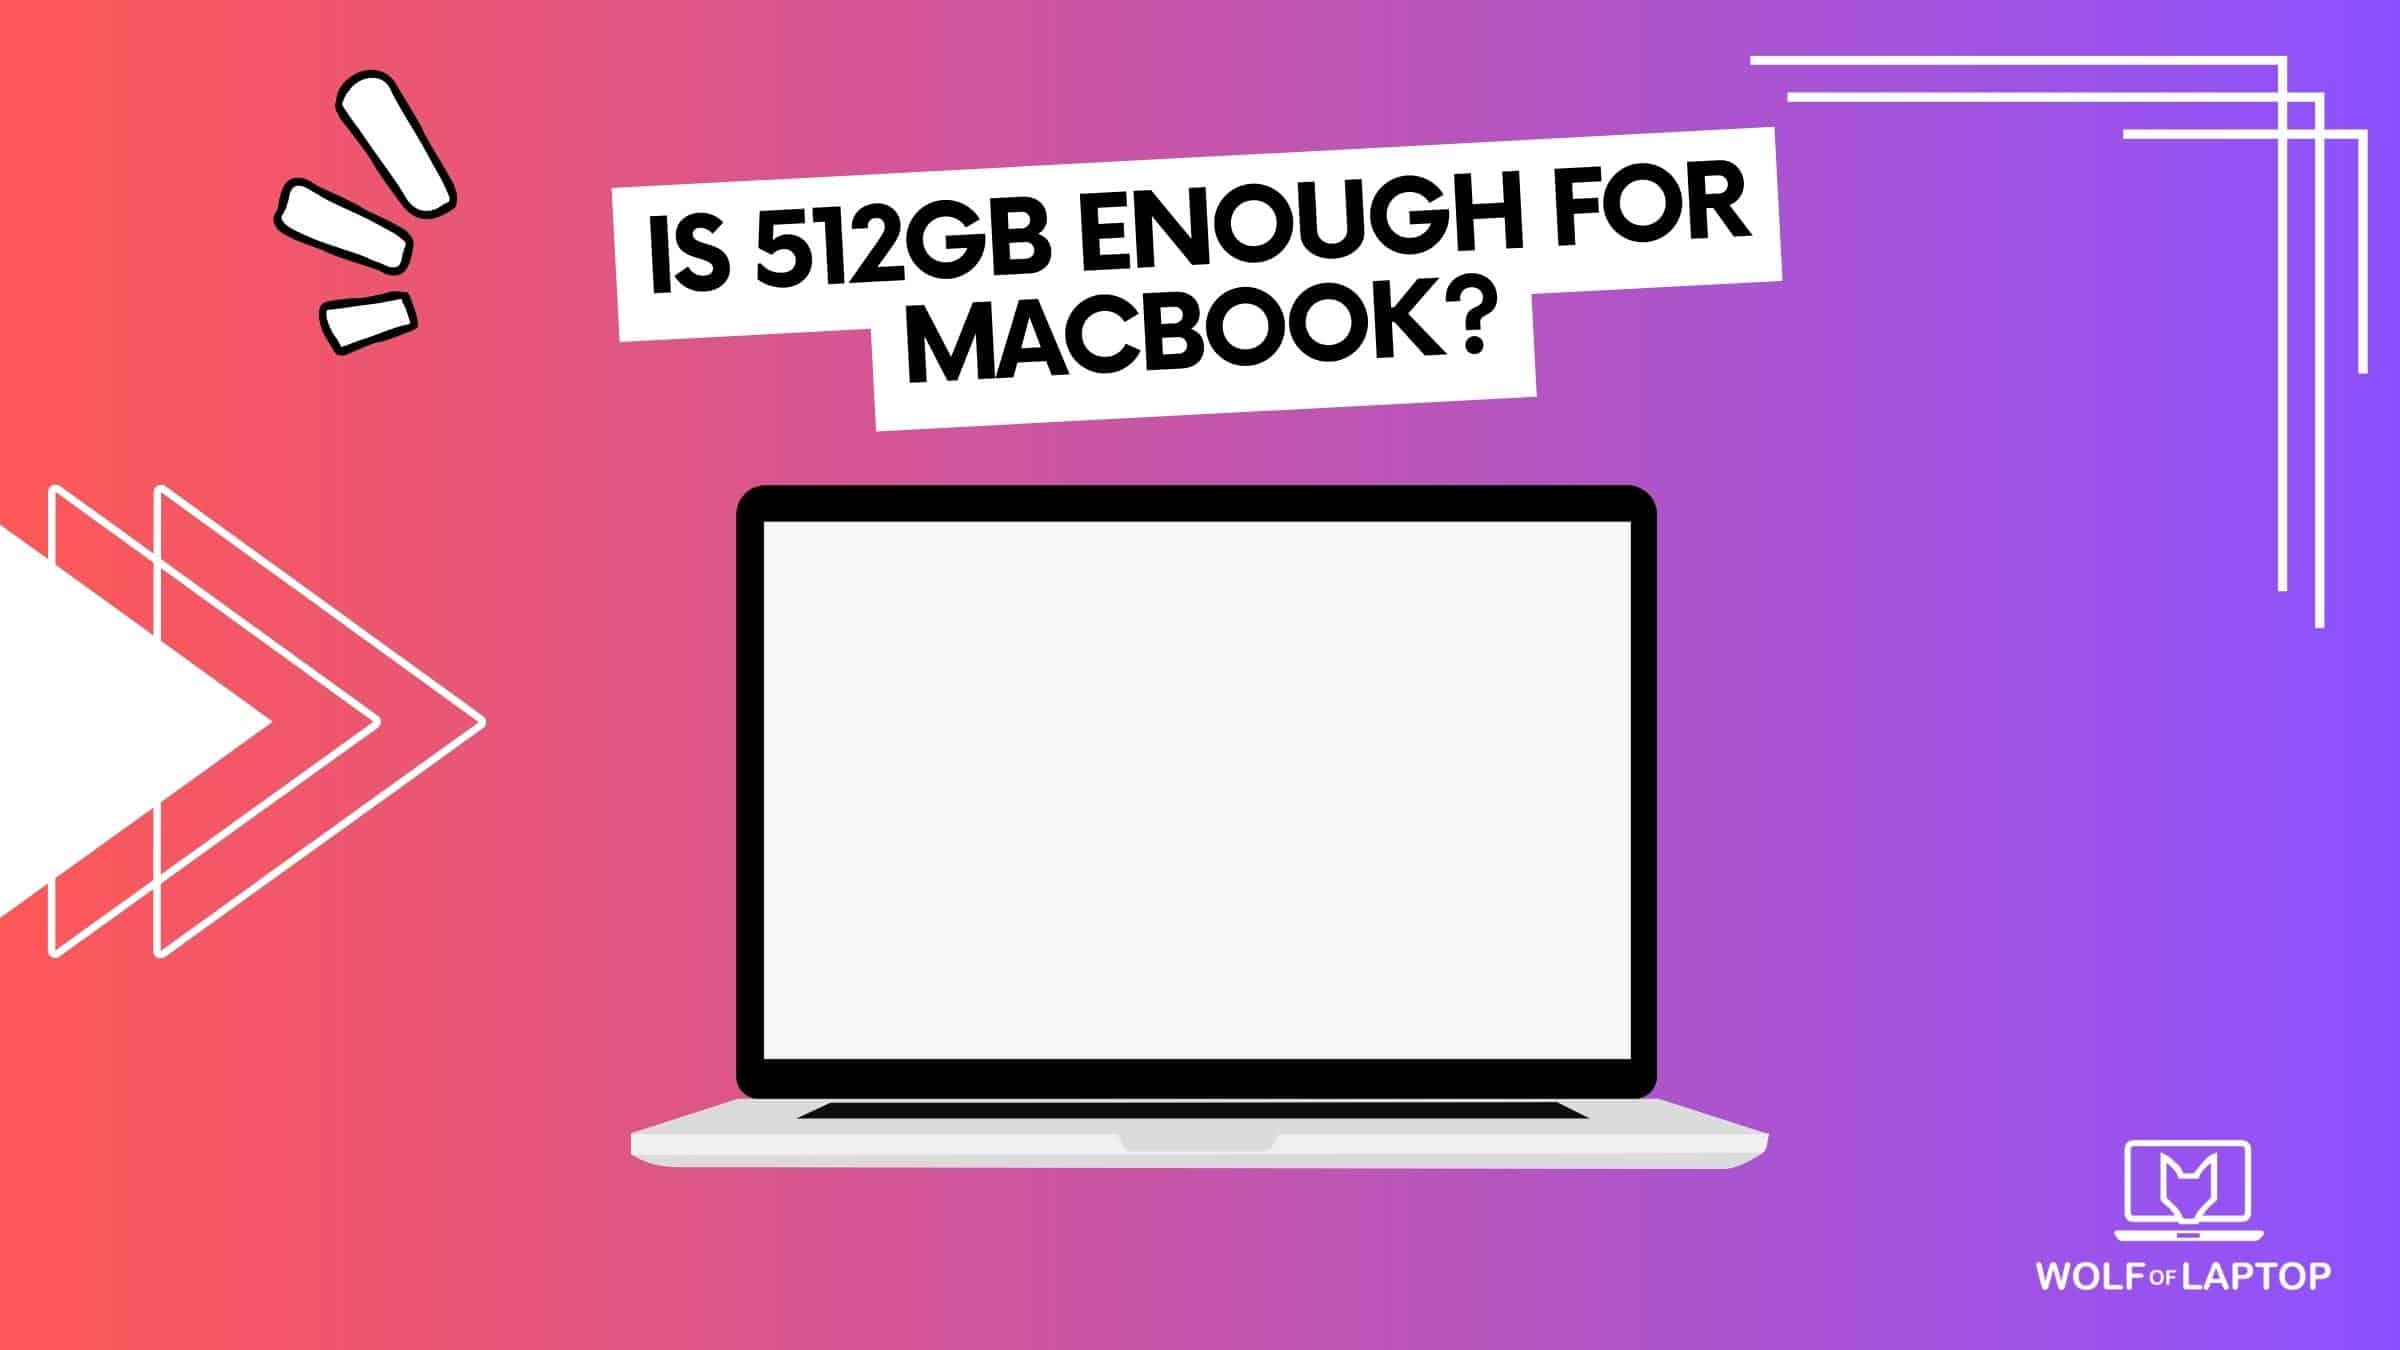 is 512gb enough for macbook? answered